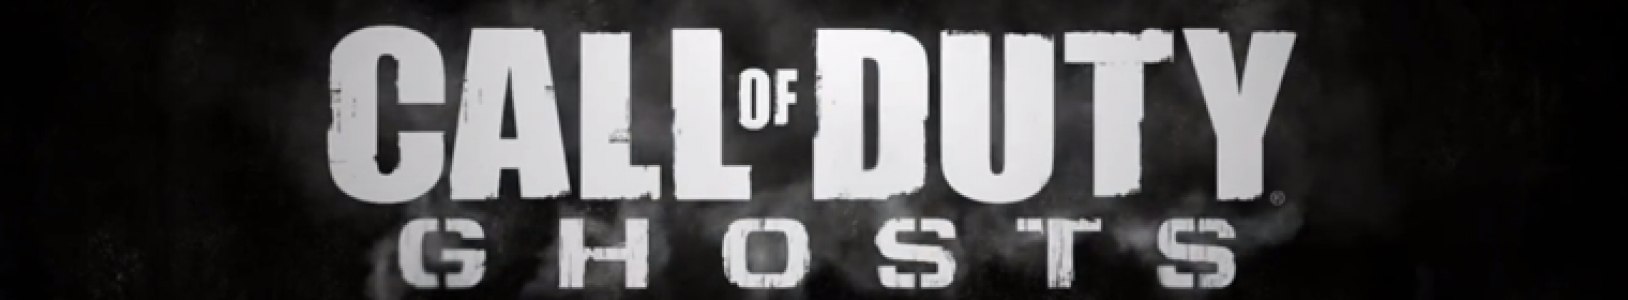 Call of Duty: Ghosts banner